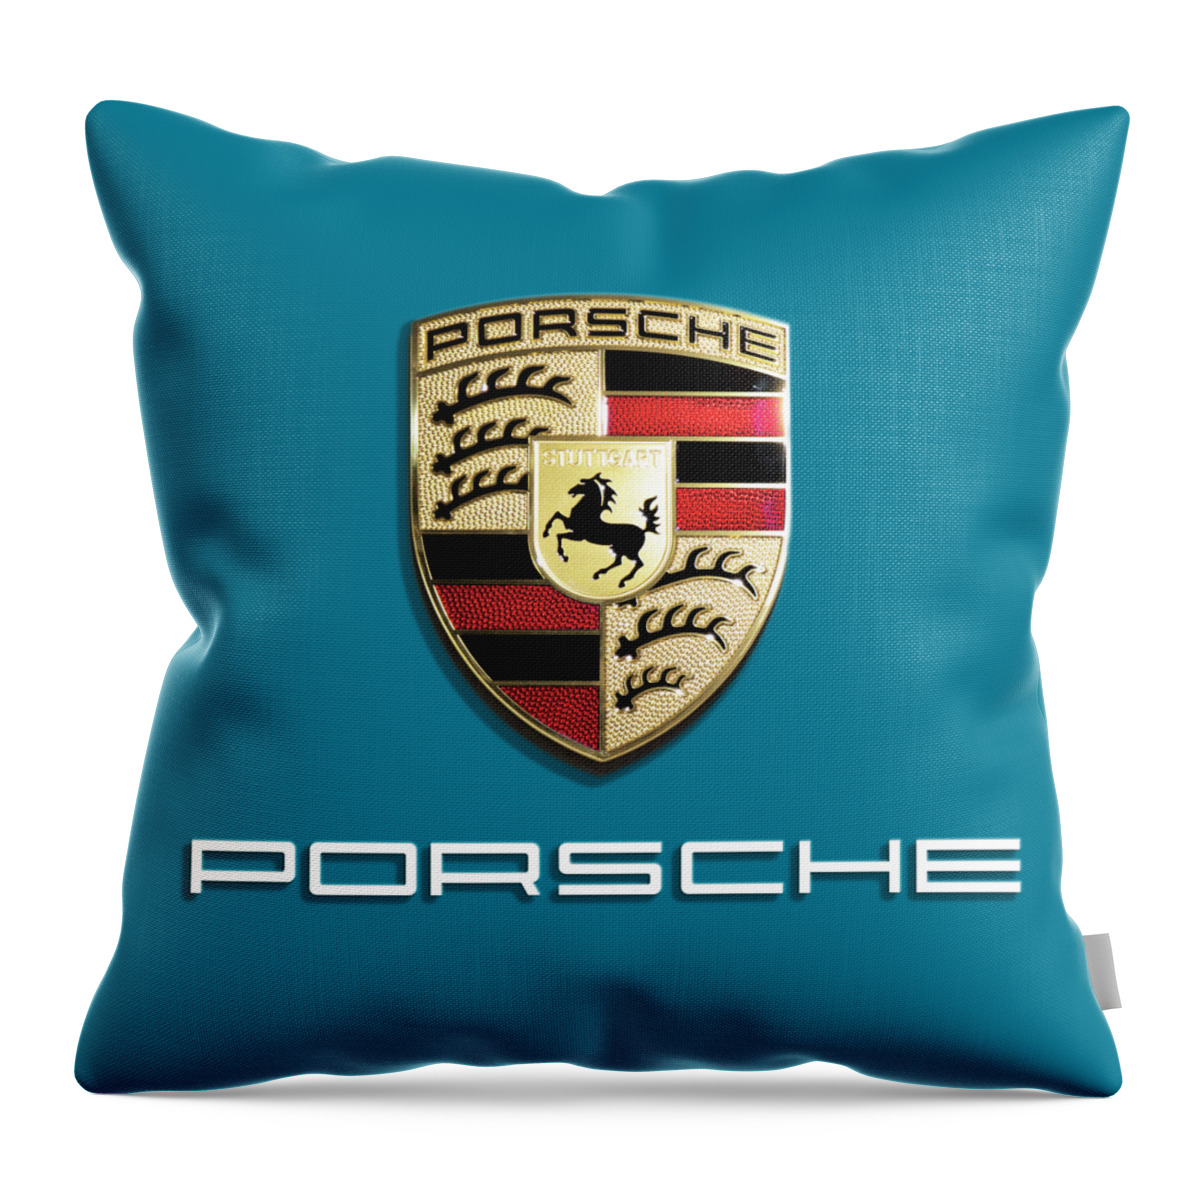 Porsche-logo Throw Pillow featuring the photograph High Res Quality Porsche Logo - Hood Emblem Isolated on Colorful Red Background by Stefano Senise